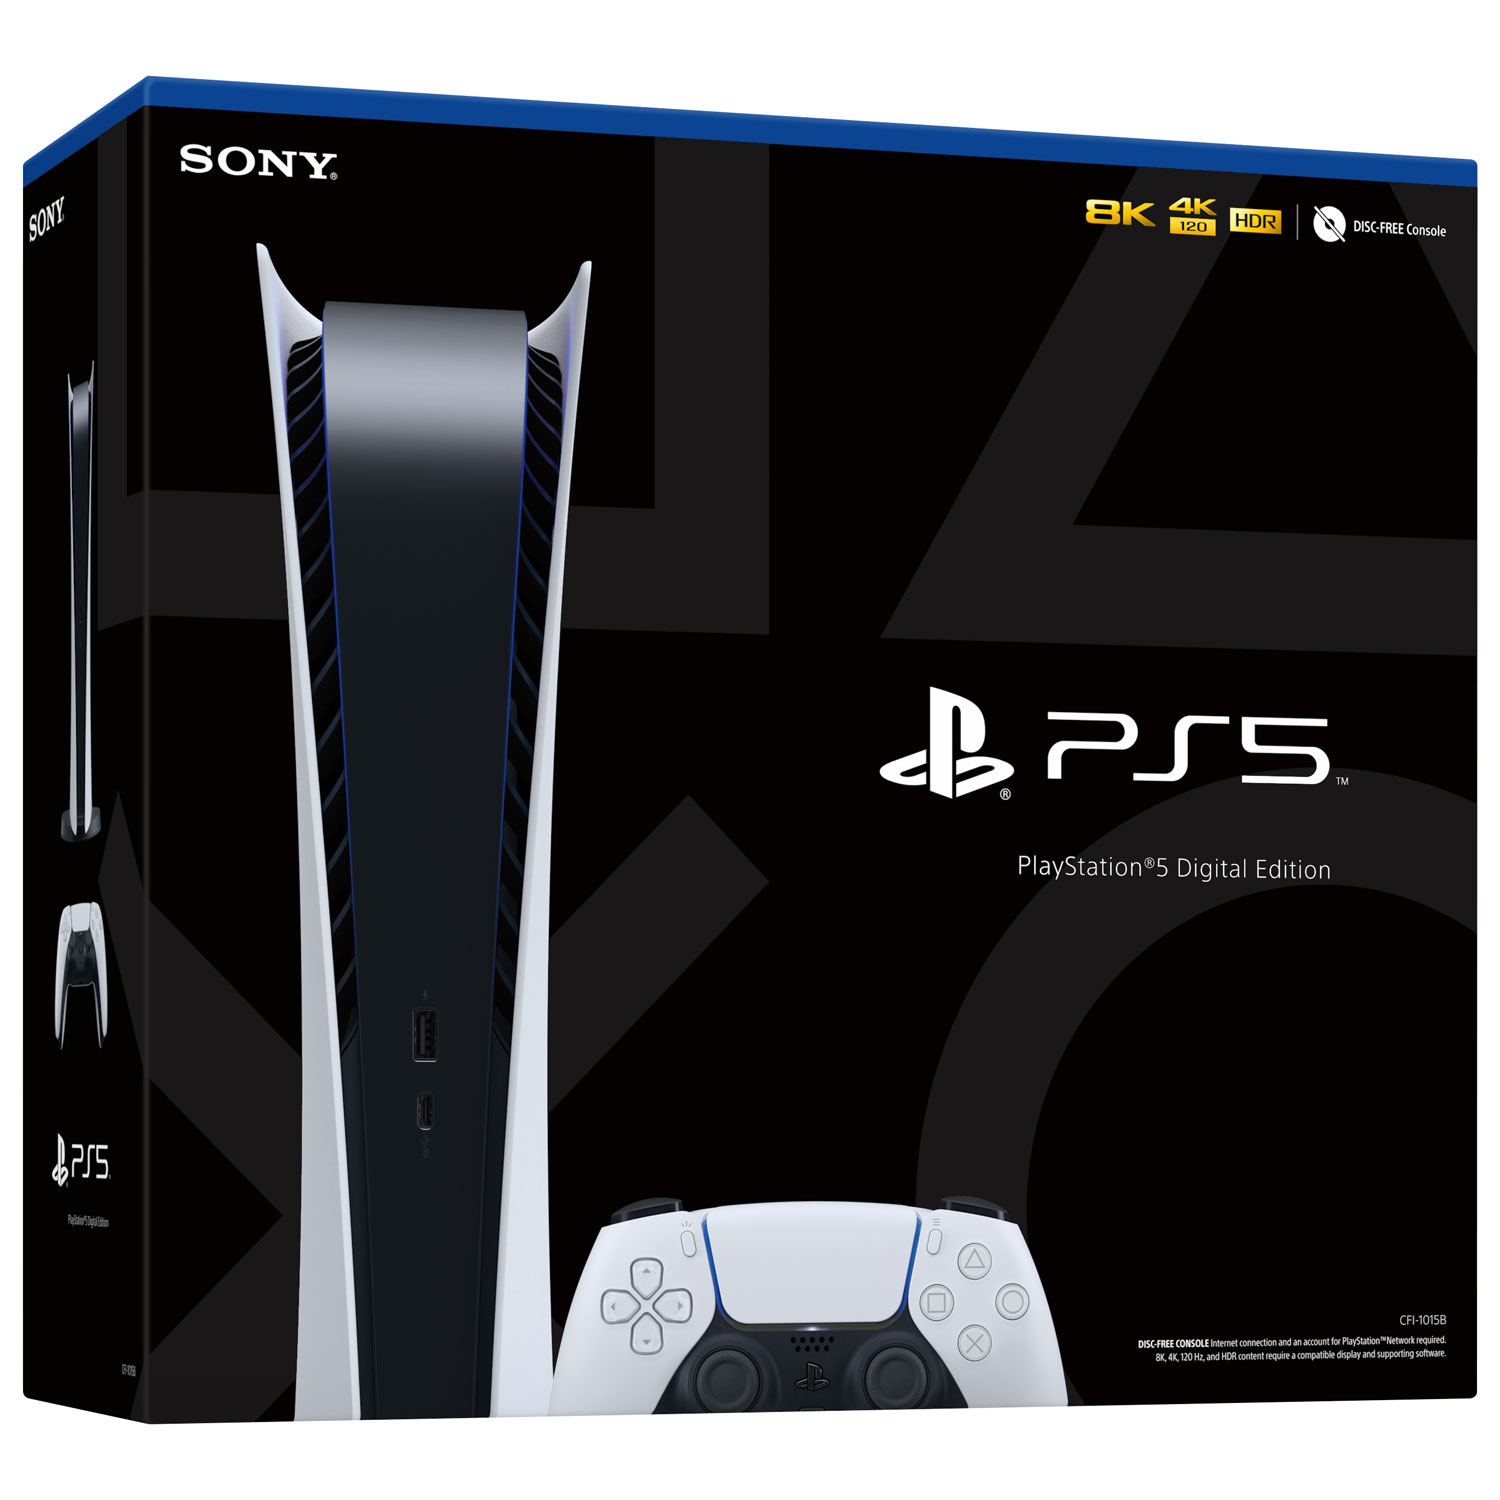 the ps5 digital edition